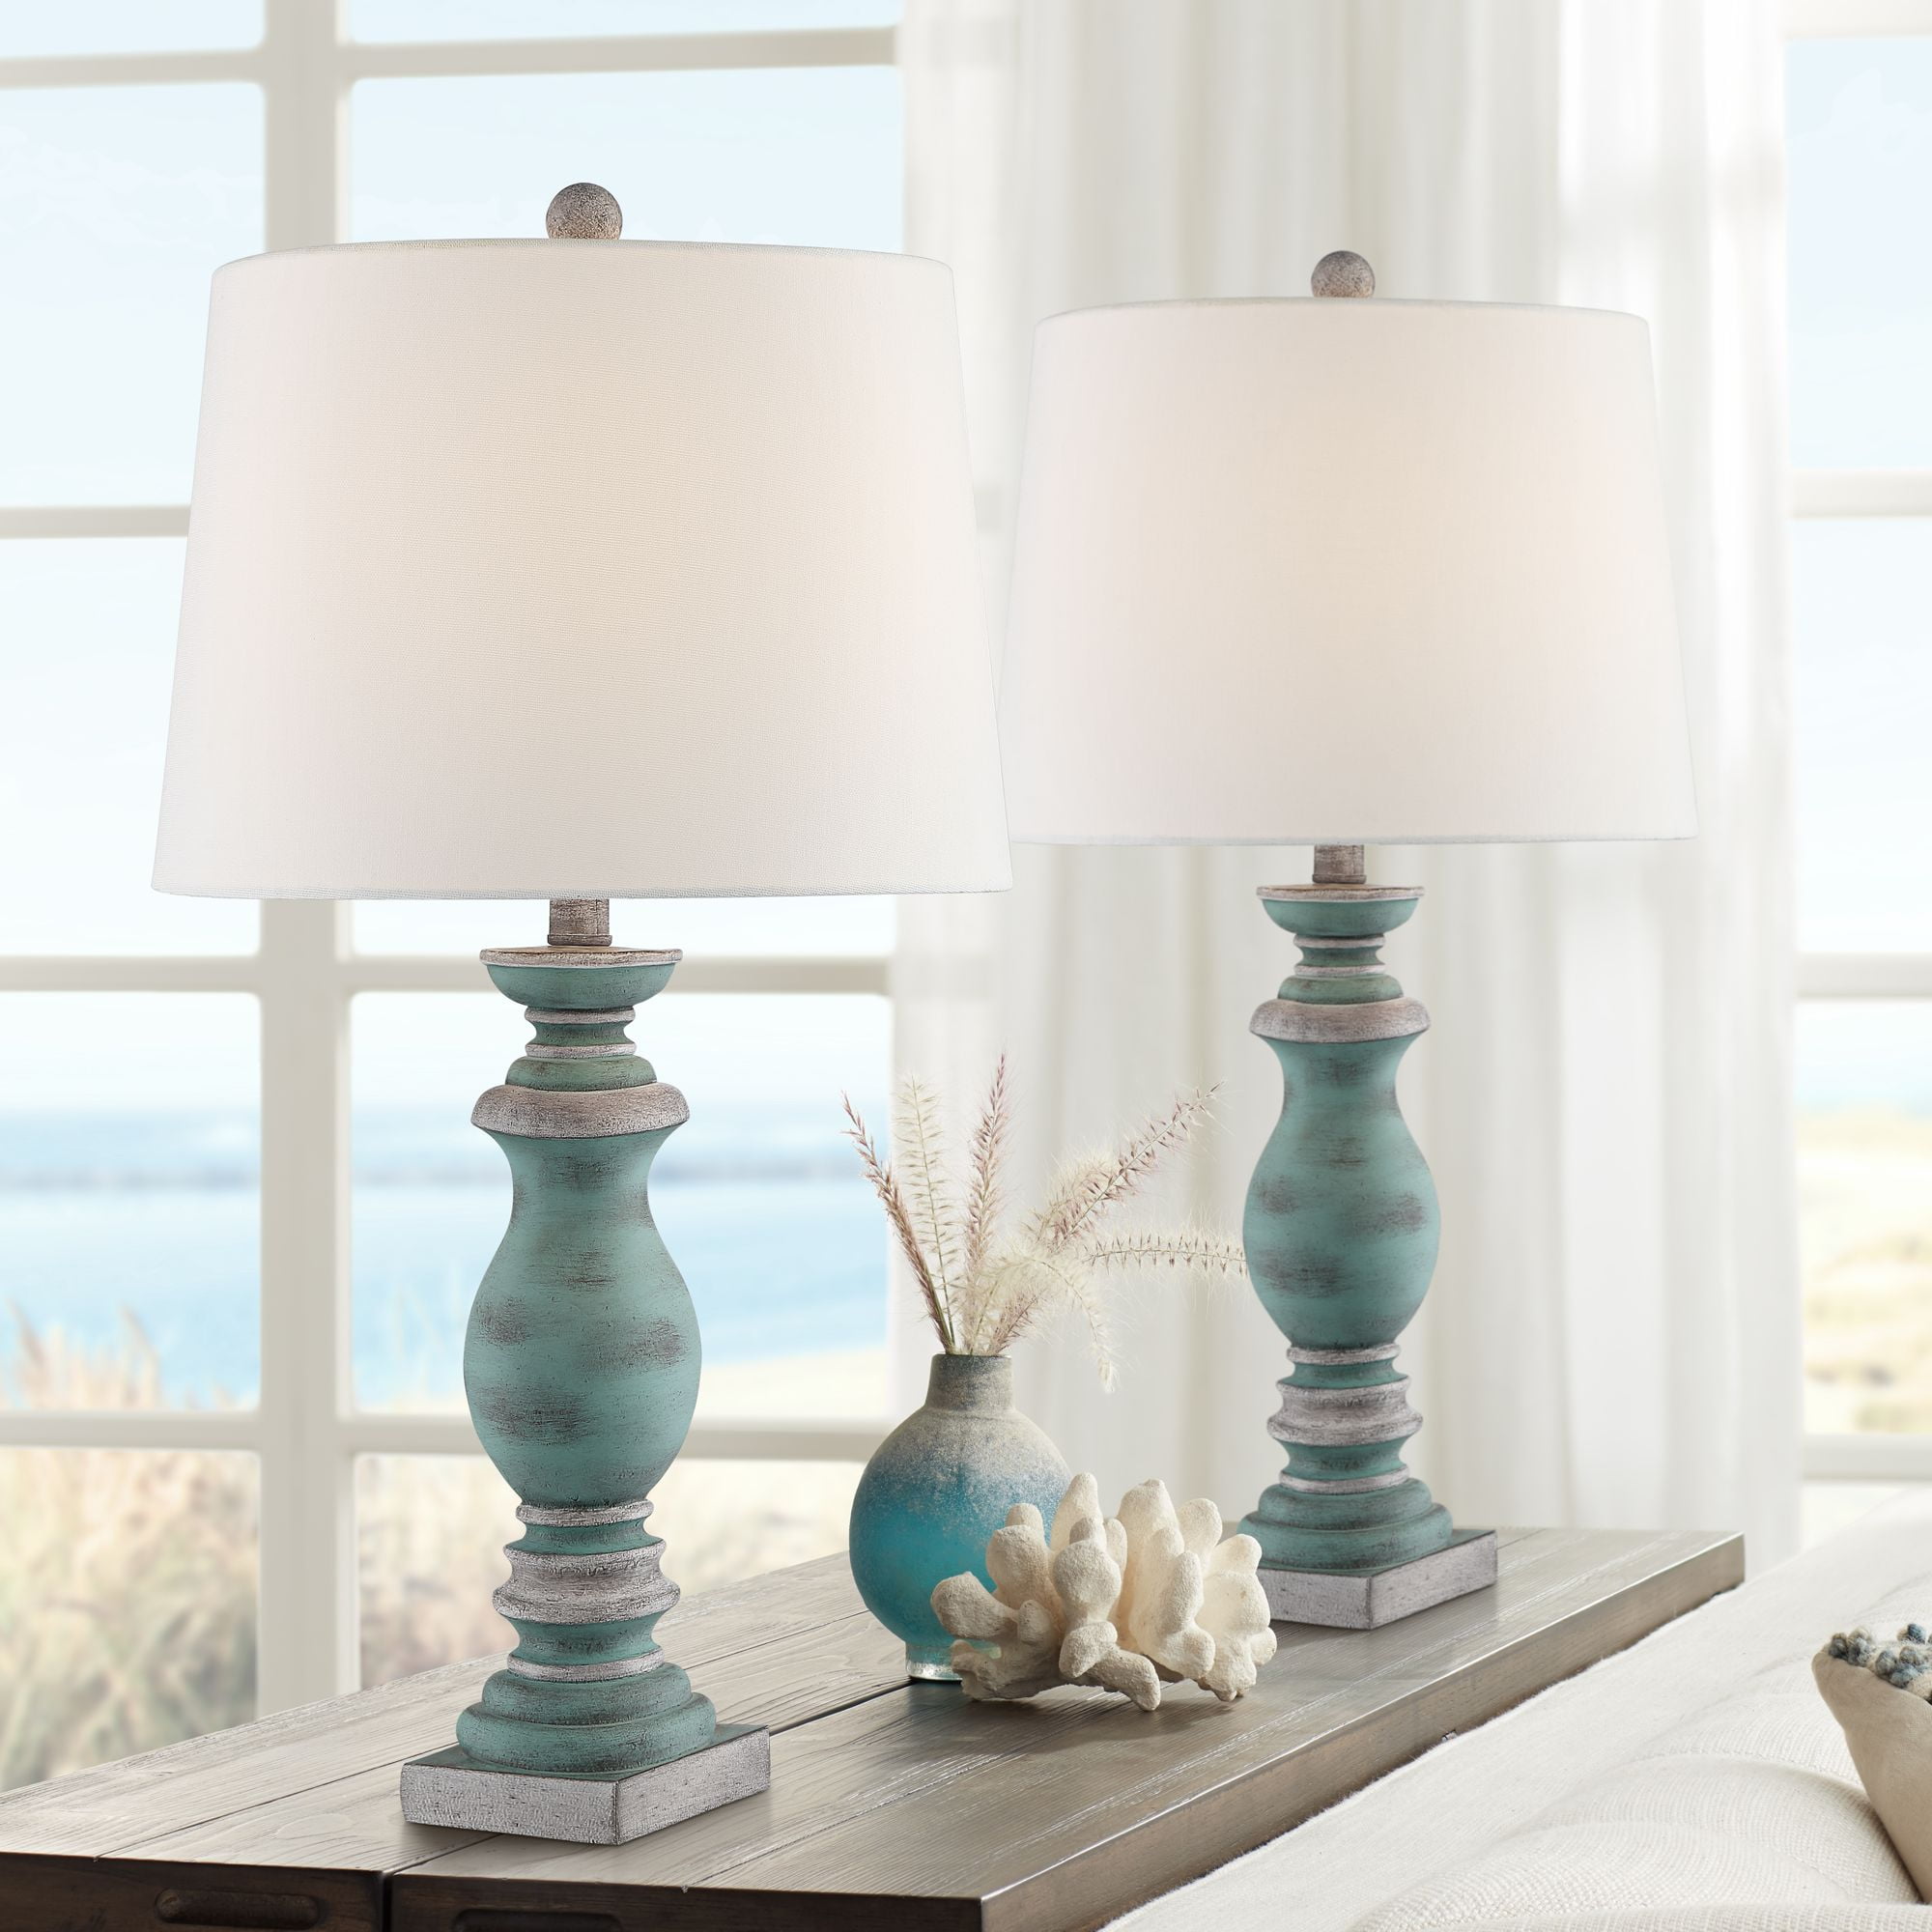 Regency Hill Patsy Blue-Gray Table Lamps Set of 2 with Table Top